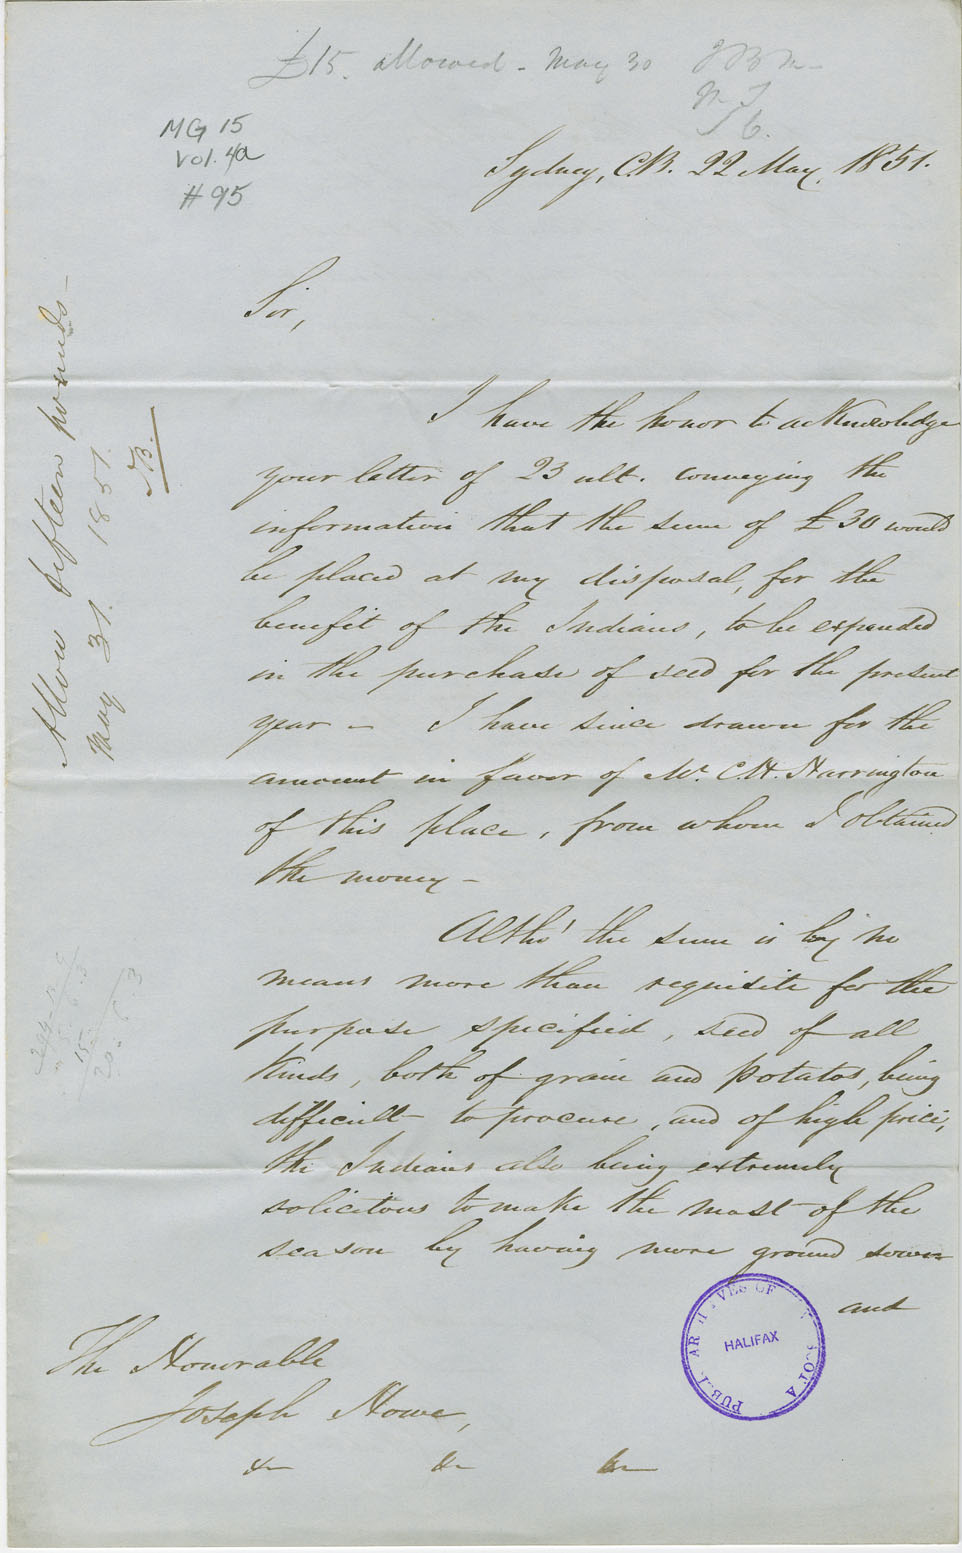 Letter asking instructions concerning dispersal of funds among Mi'kmaq in Cape Breton.